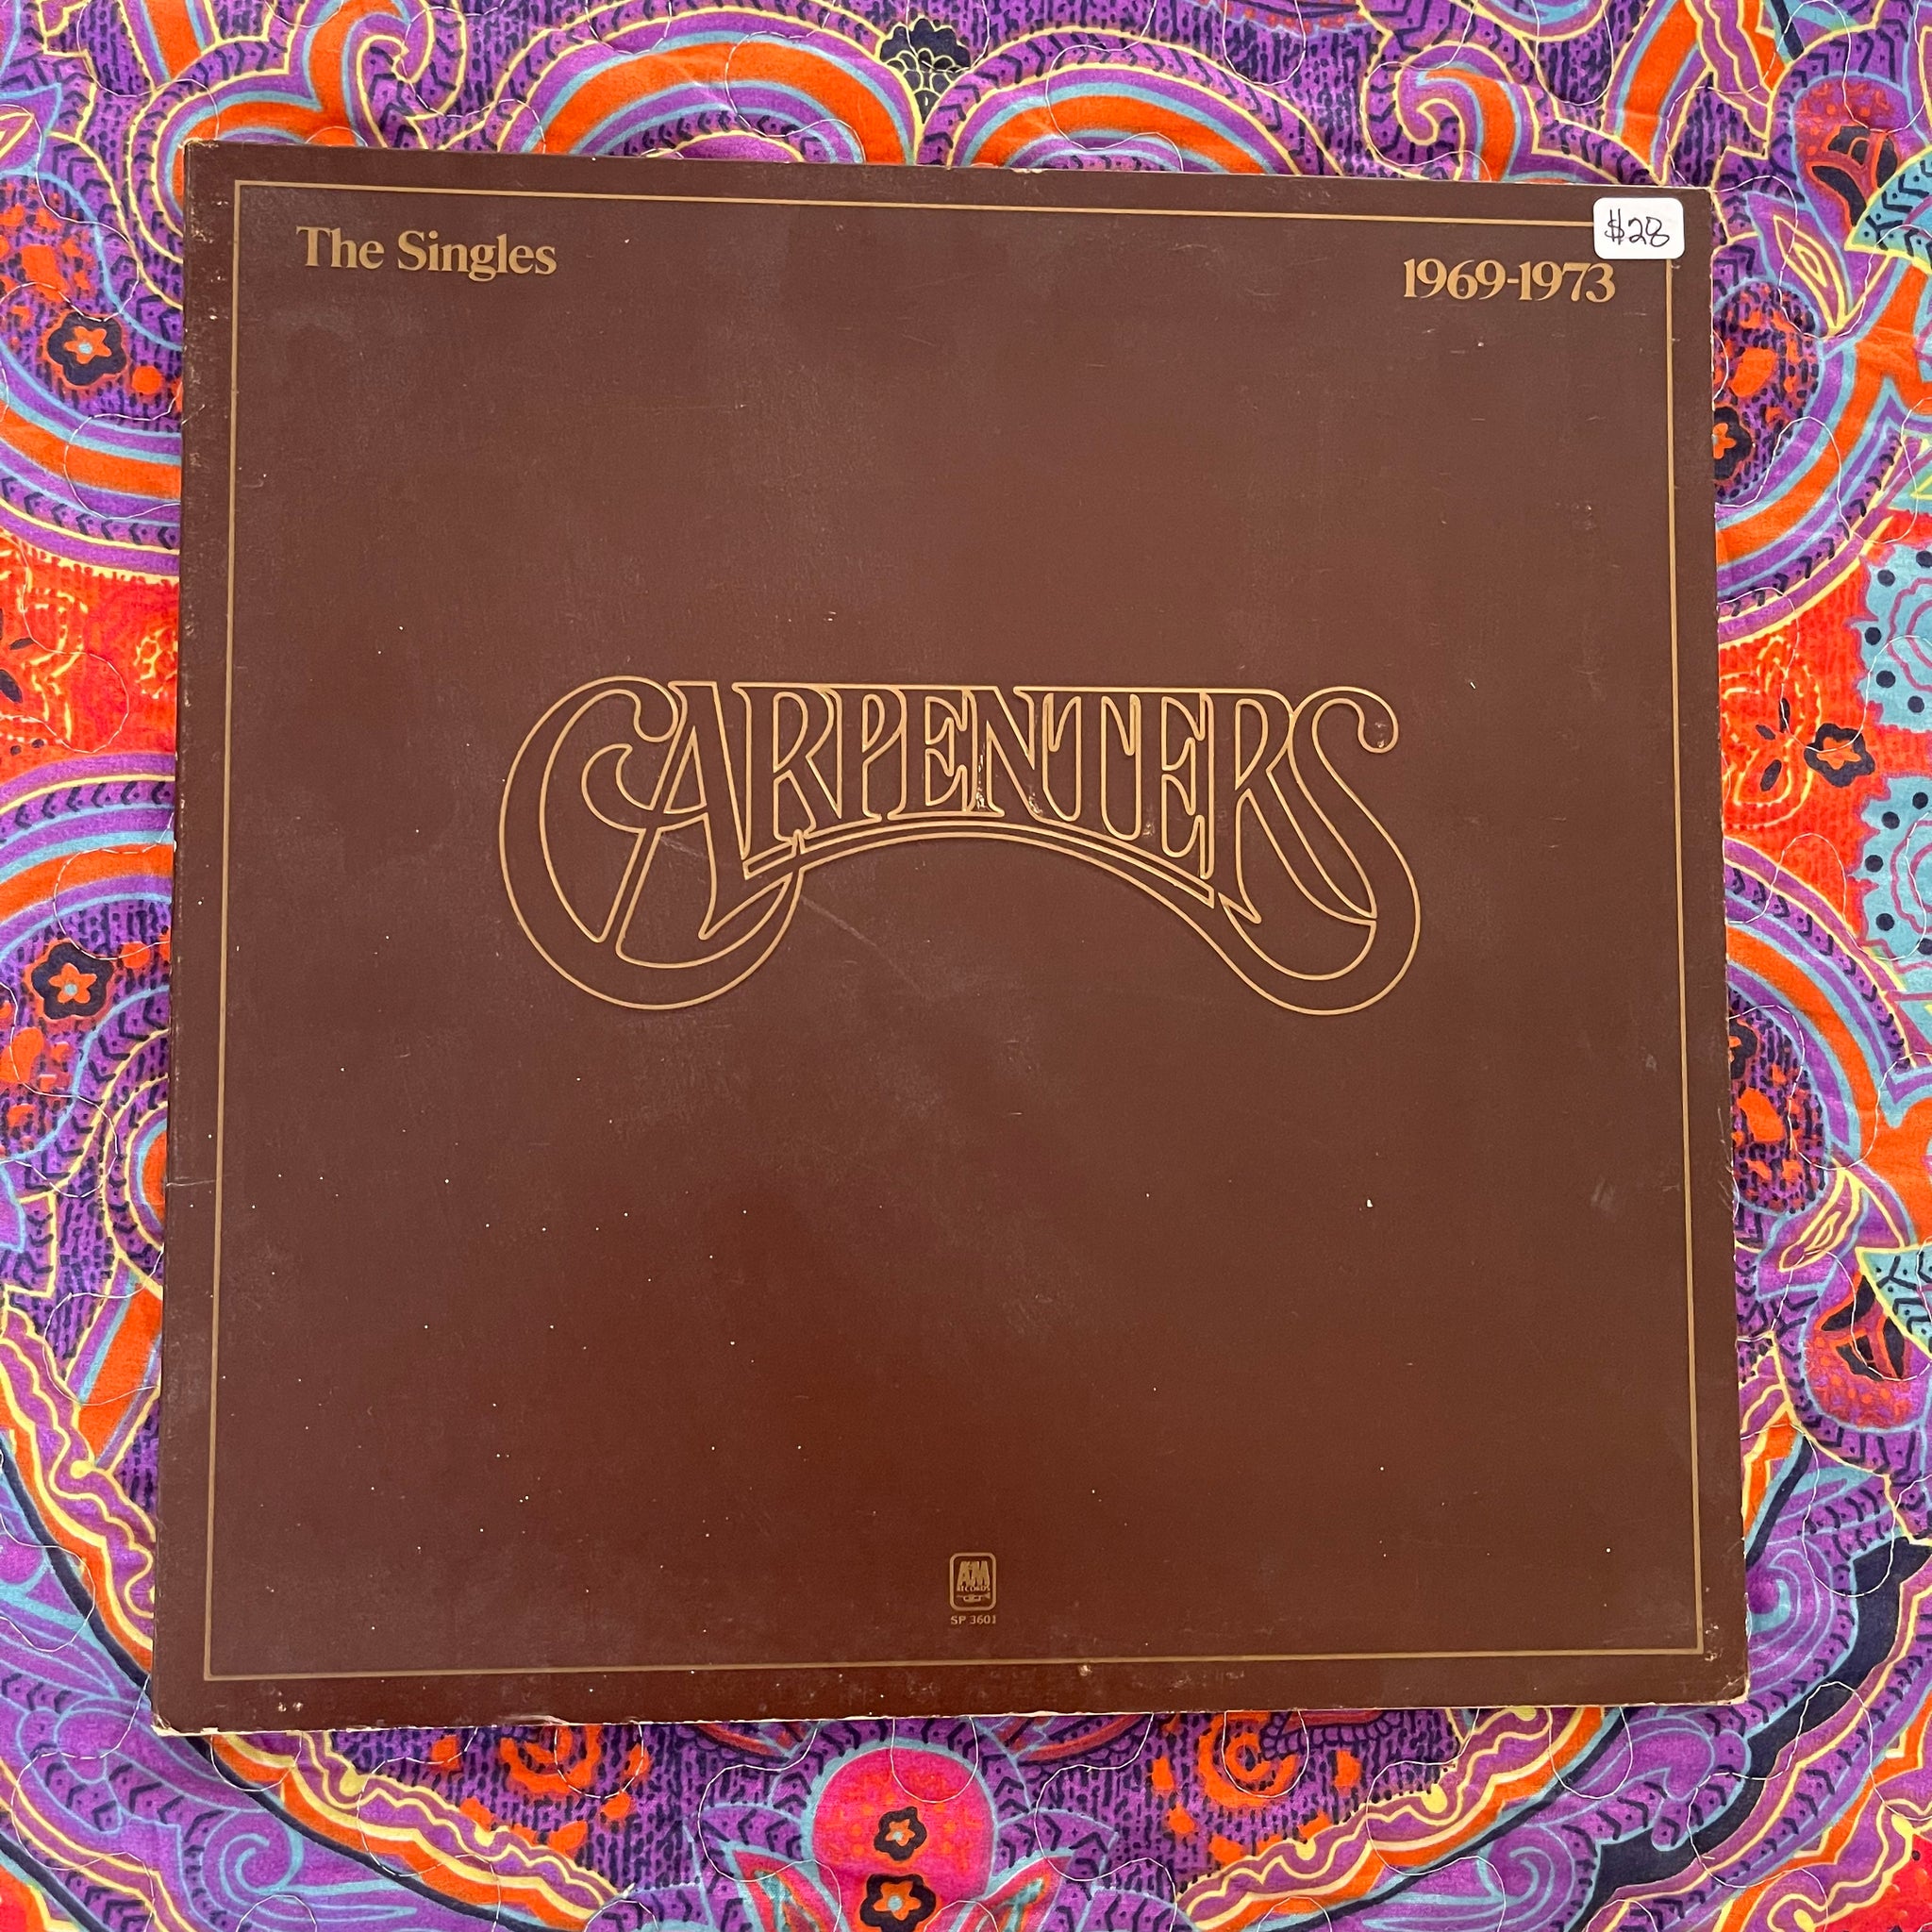 The Carpenters-The Singles/1969-1973